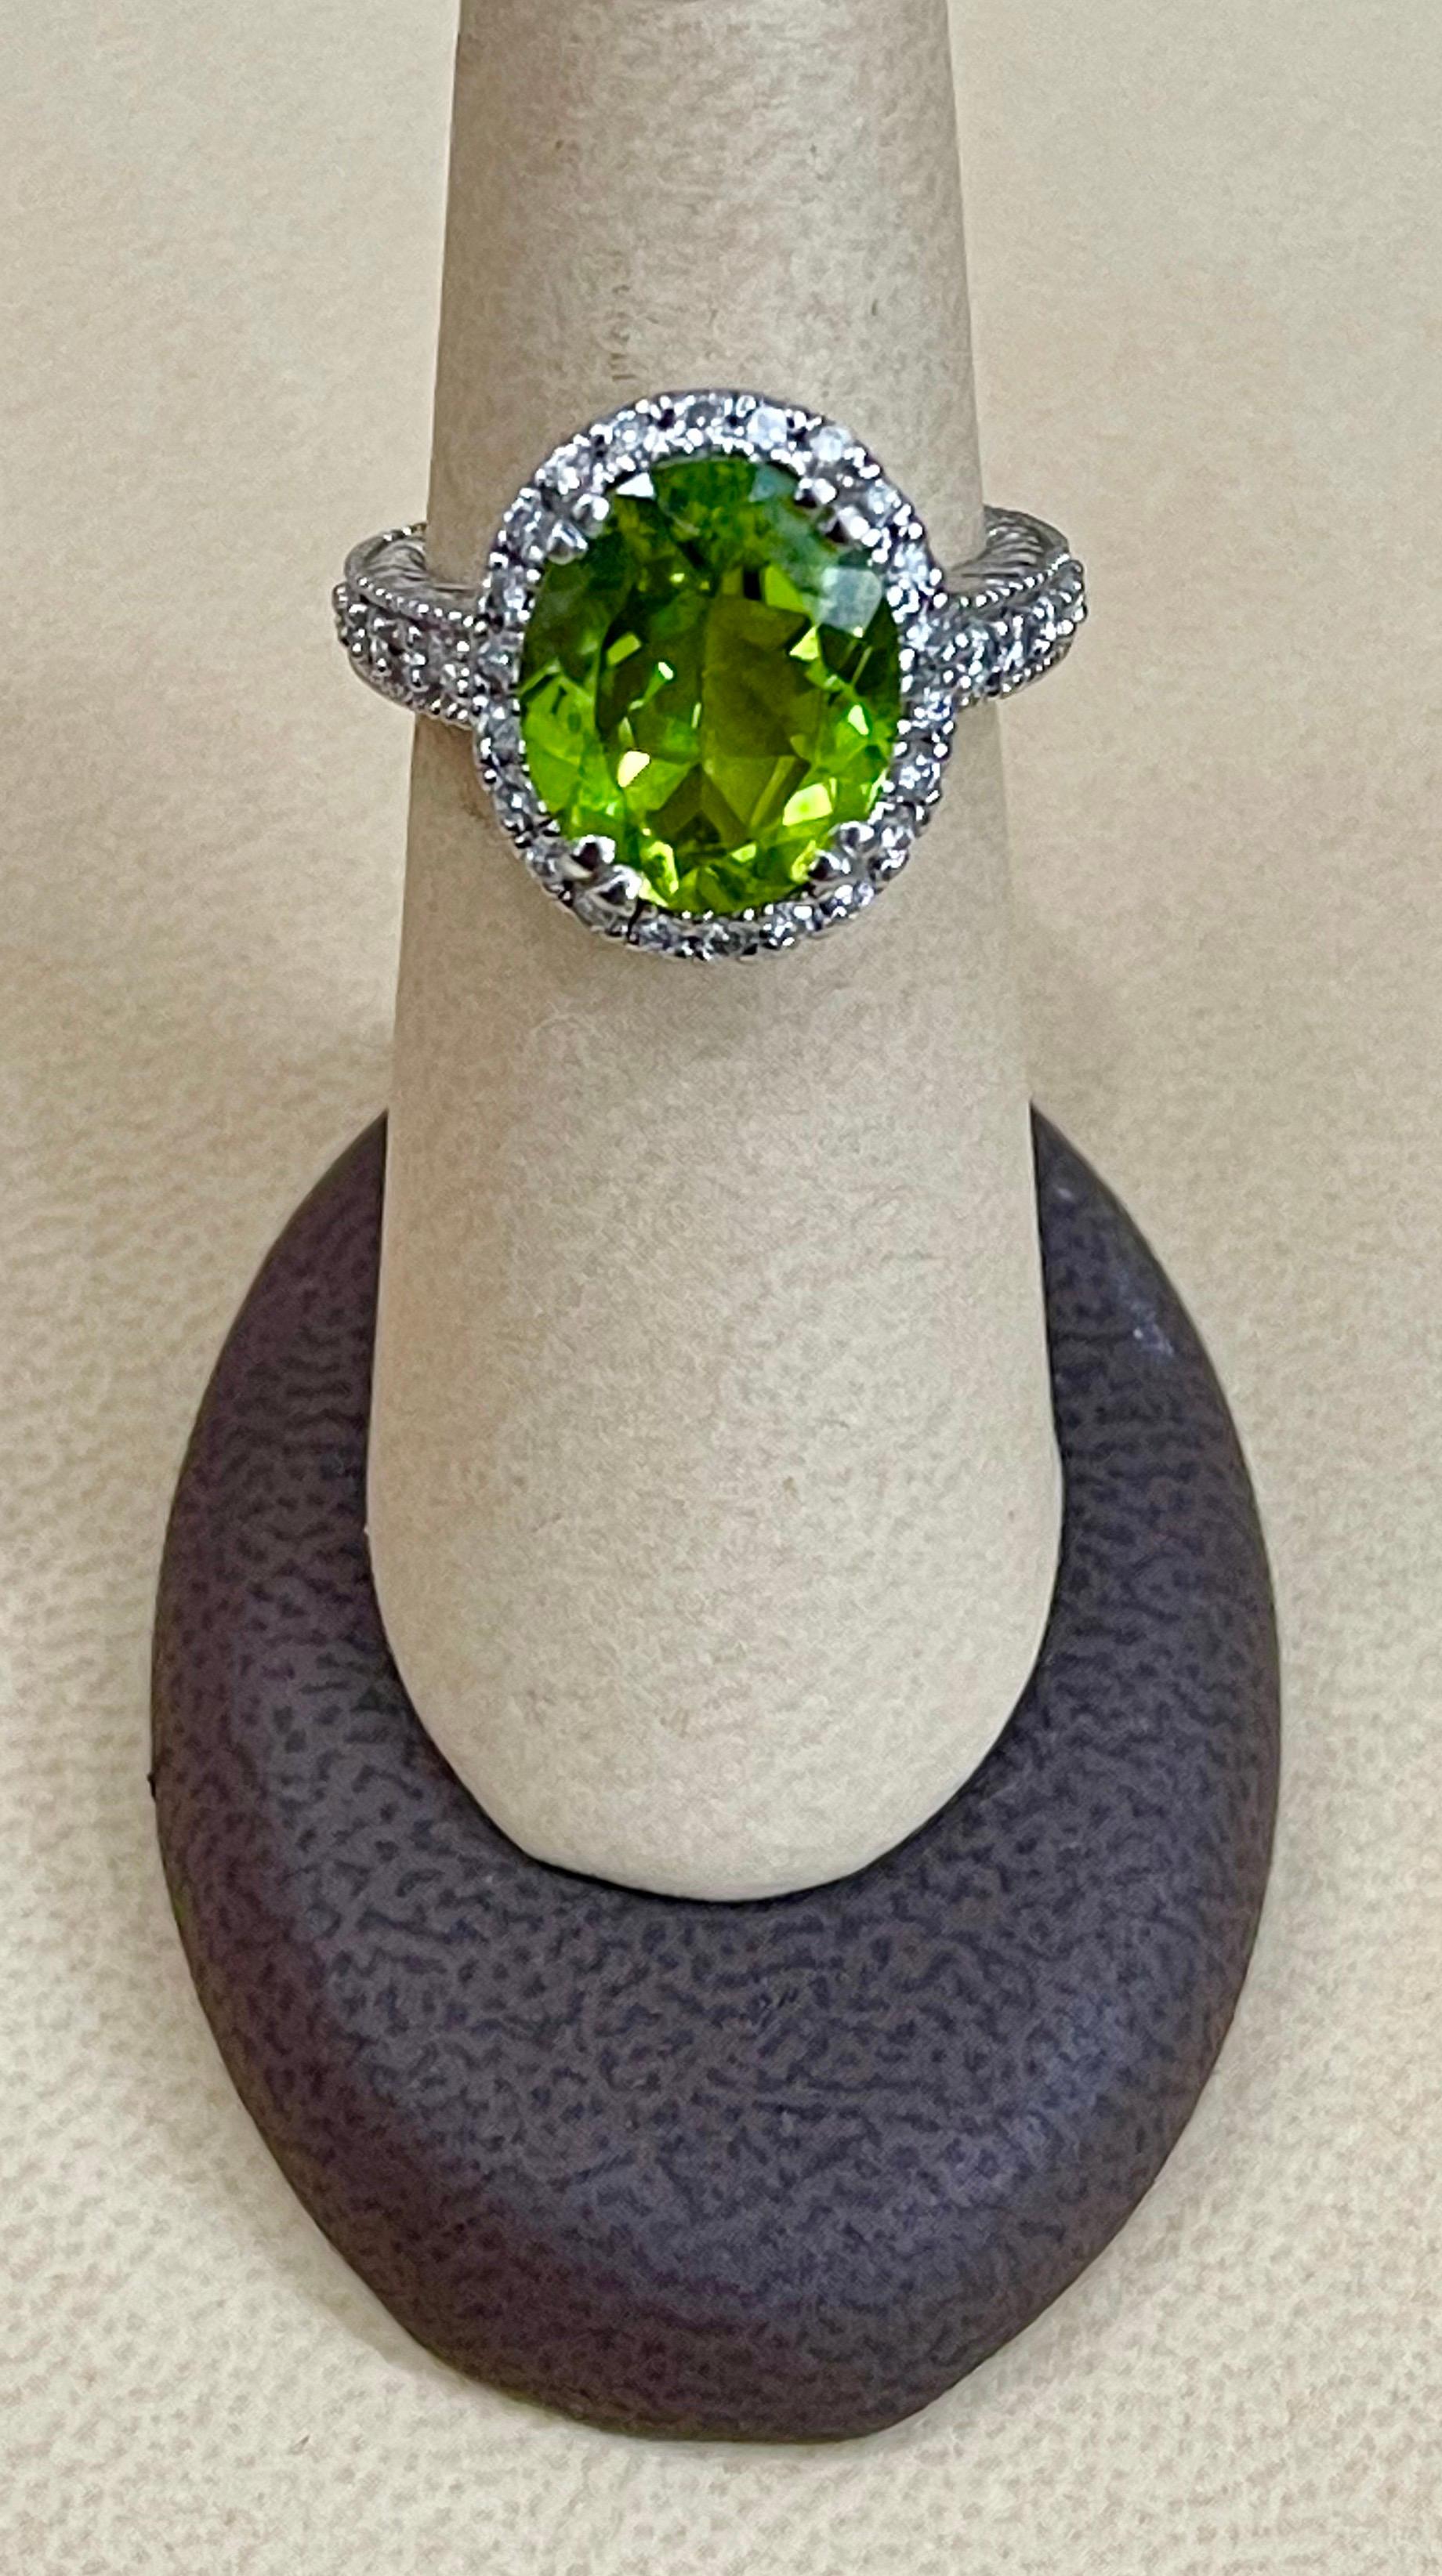 7 Carat Oval Peridot and 1.2 Carat Diamonds 14 Karat White Gold Cocktail Ring For Sale 1